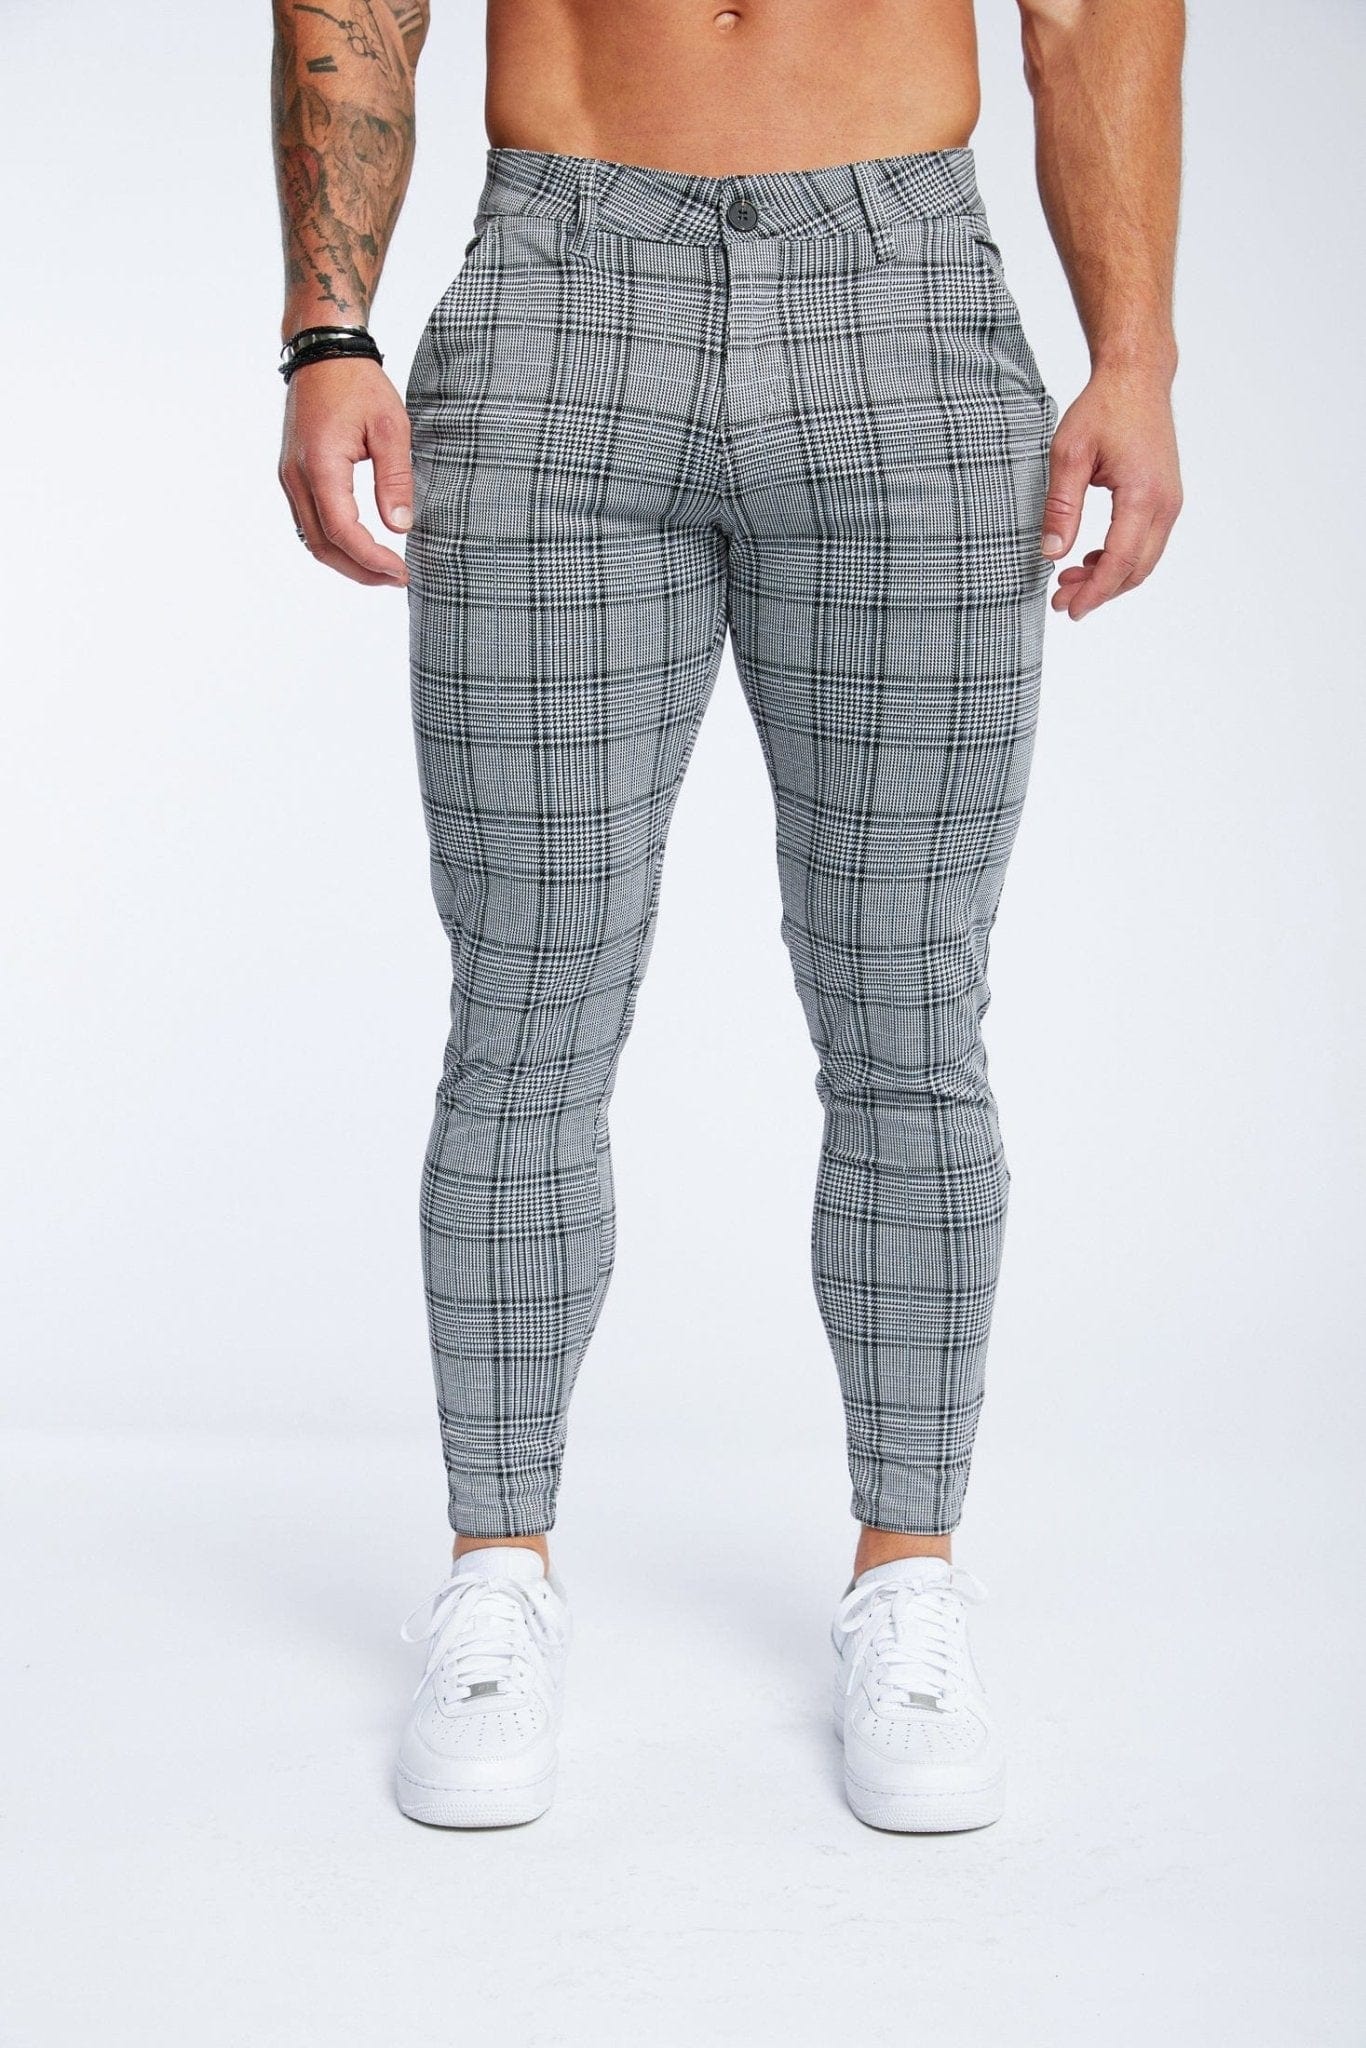 Men's Plaid Dress Pants Tapered Leg Chino Checkered Casual Business Suit Trousers  Skinny Stretchy Slim Fit Trousers - Walmart.com